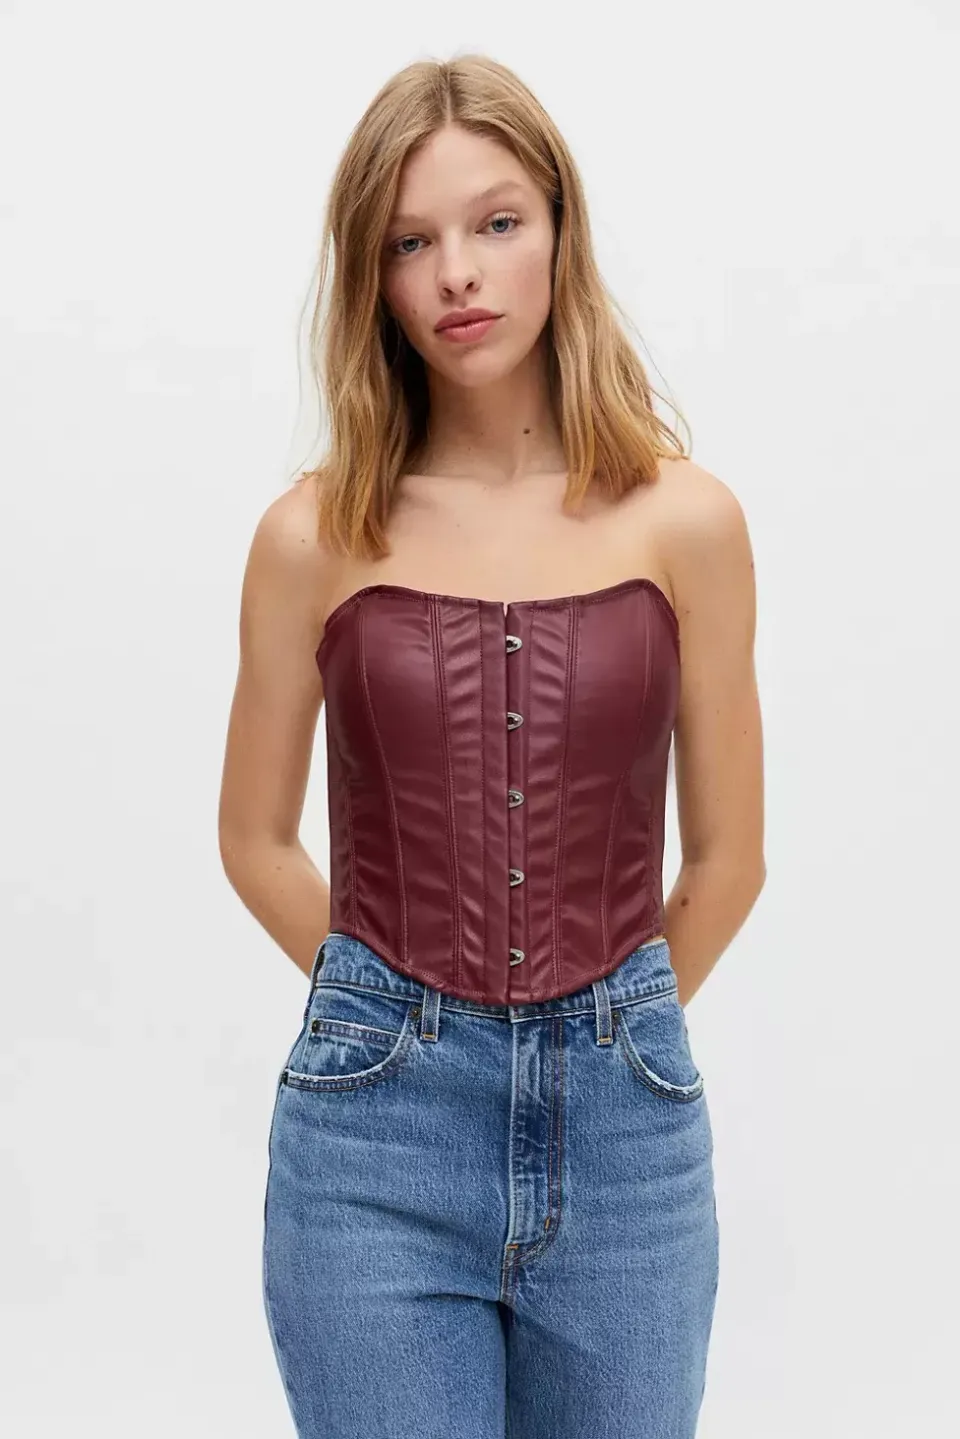 Urban Outfitters corset top review: Comfy and cute - Reviewed